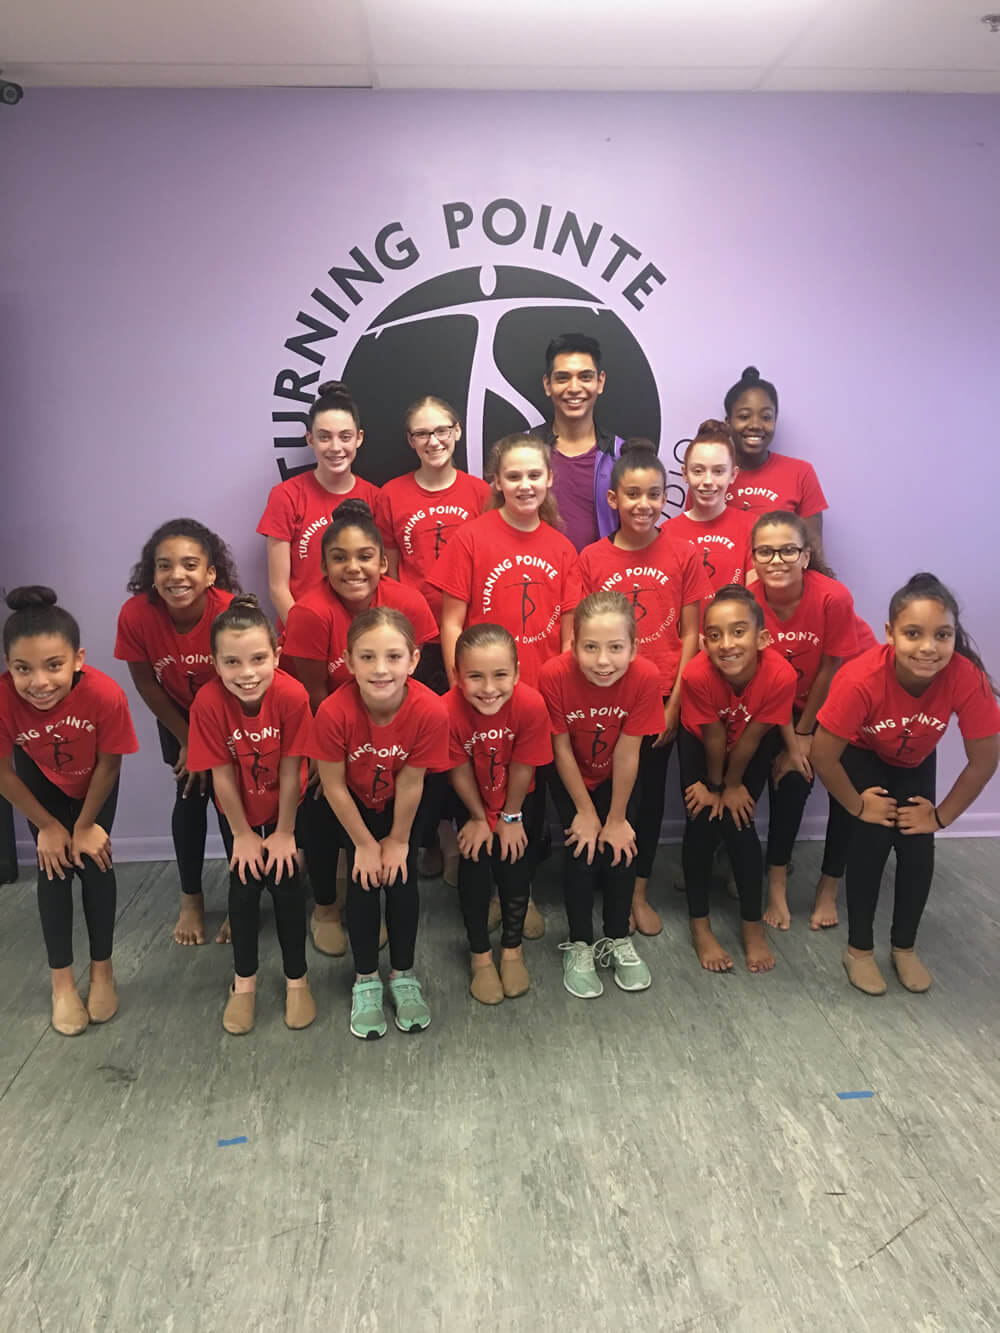 turning pointe a dance studio